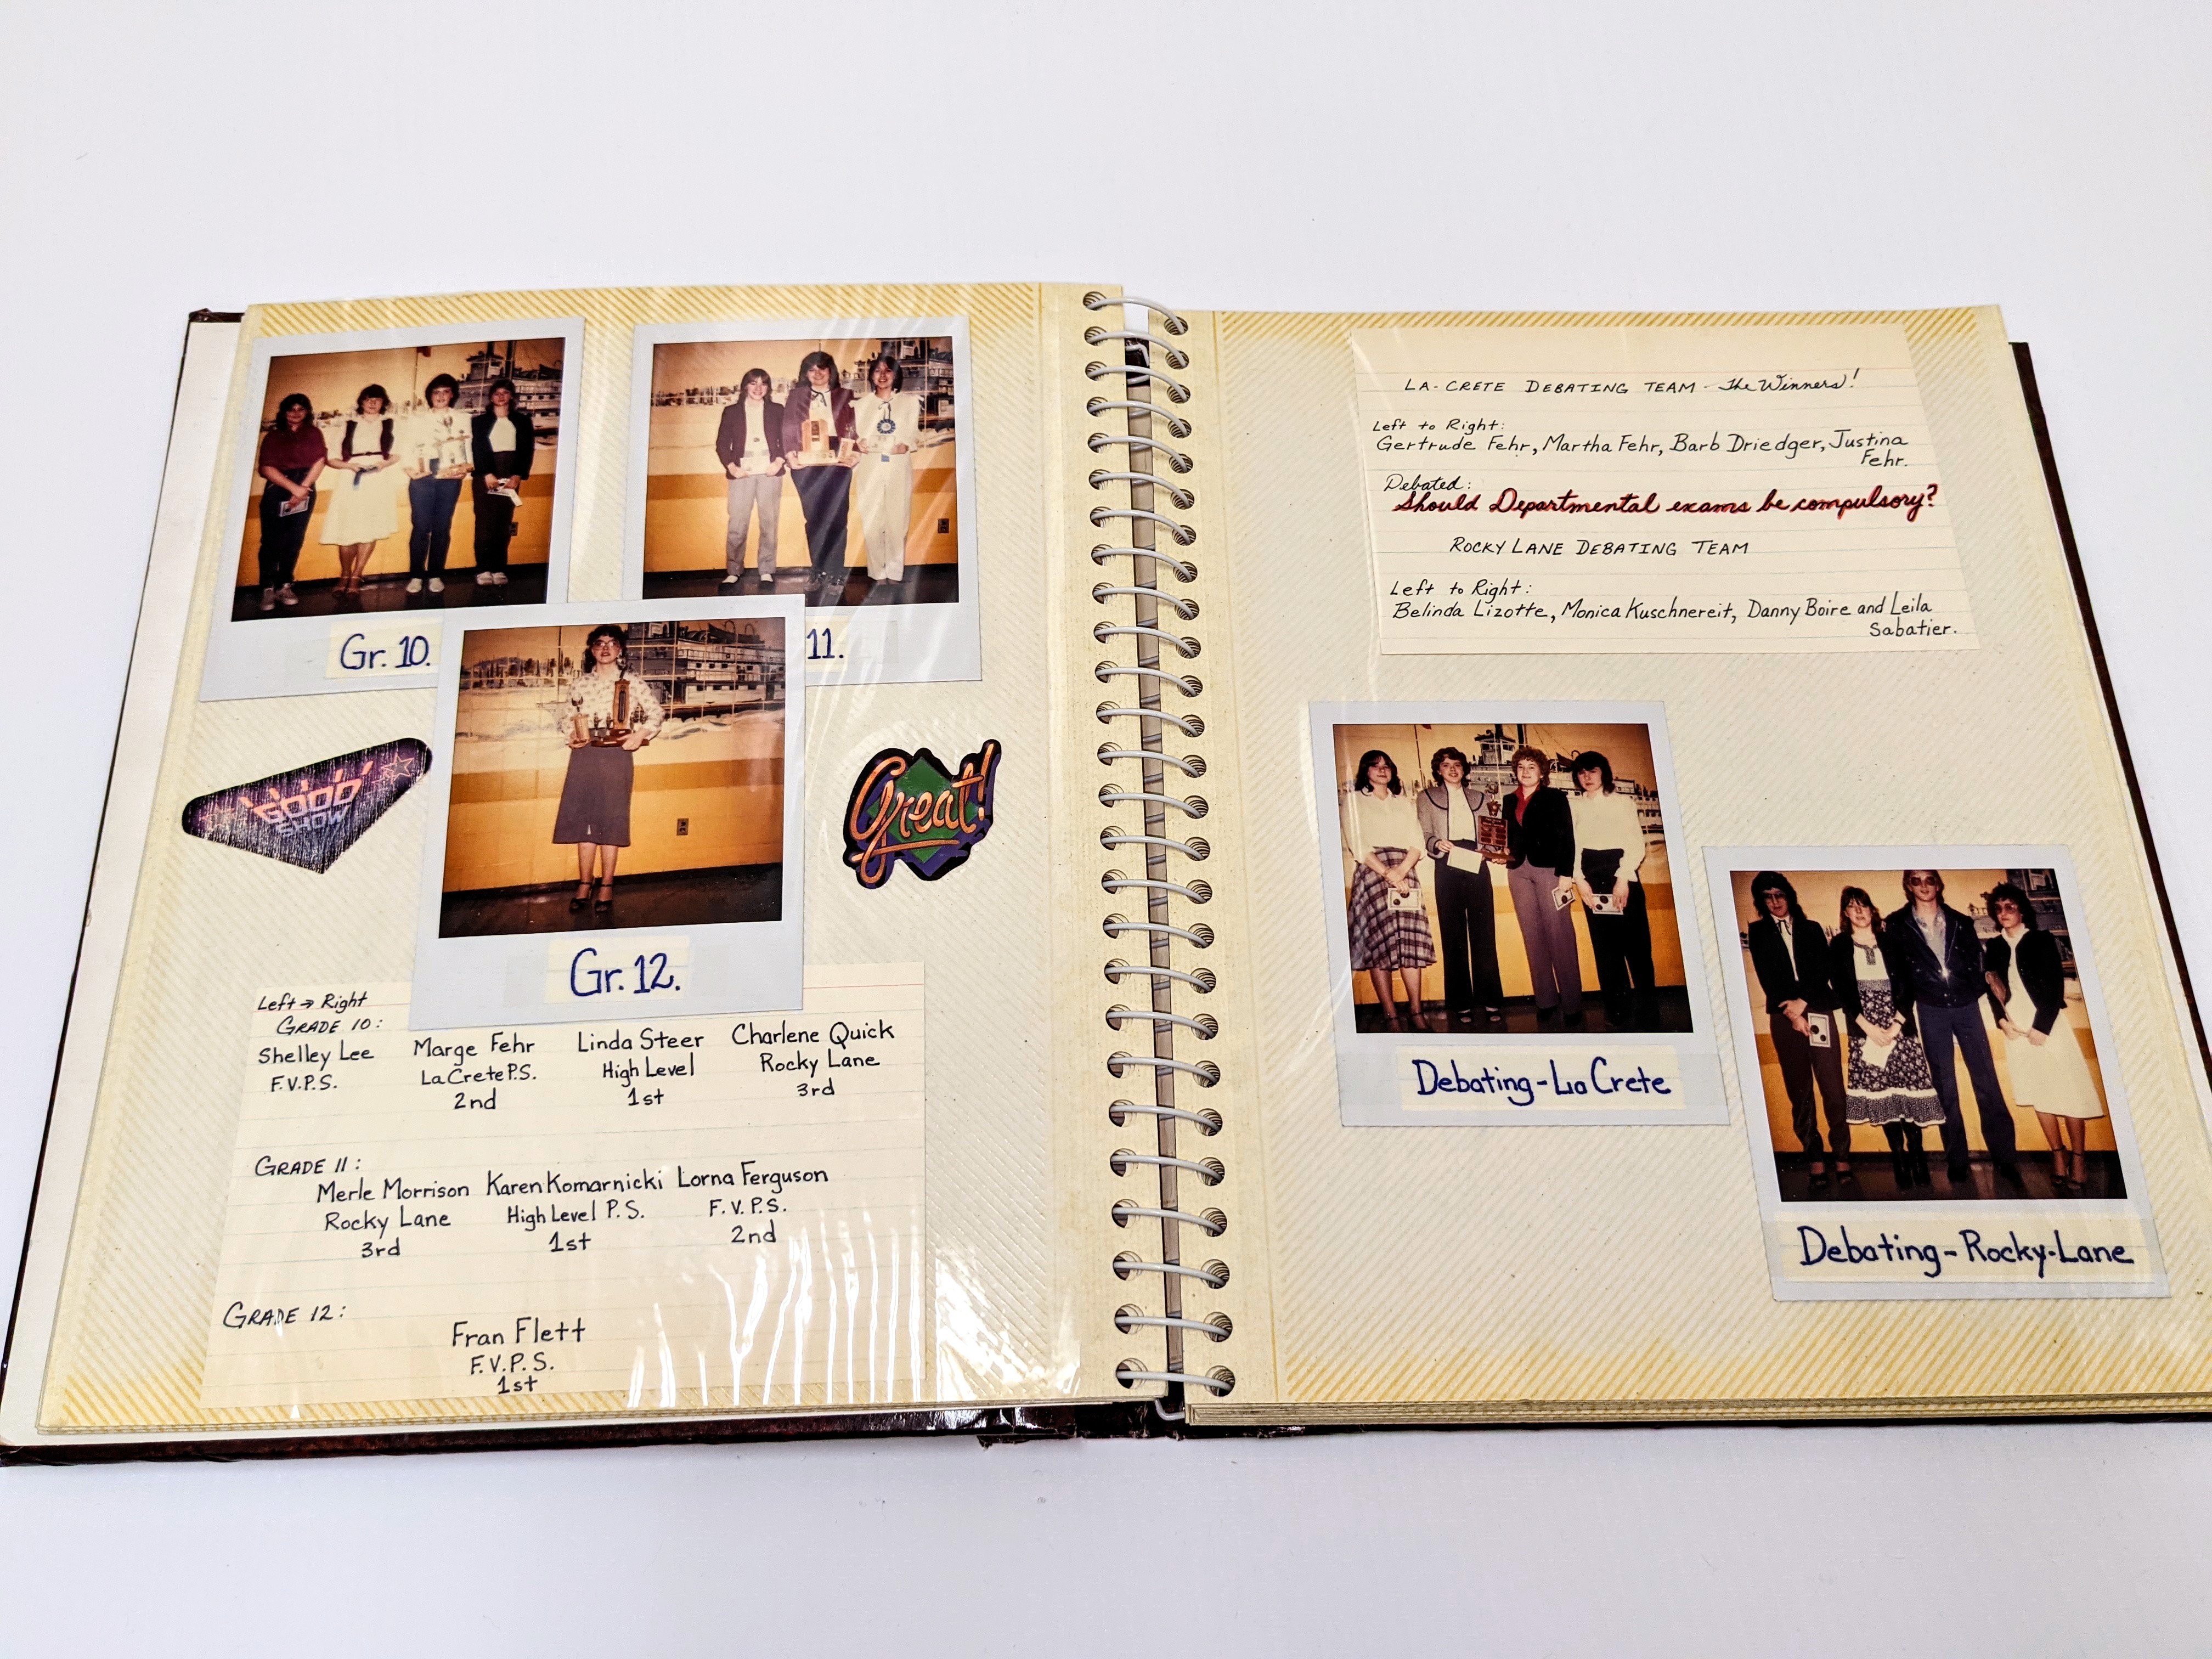 Not necessarily an old artifact - but interesting nonetheless. This scrapbook is labelled as "Public Speaking" and documents the competitors, winners, and categories of the competition. This was an annual competition and this scrapbook documents the years 1983 + 1984. Just like sports competitors came from across the region (High Level, Rocky Lane, La Crete, Buffalo Head Prairie) to duel and challenge each other in debating and prove their oratory skills!

20/09/2021
2011.20.118 / Fort Vermilion Public School